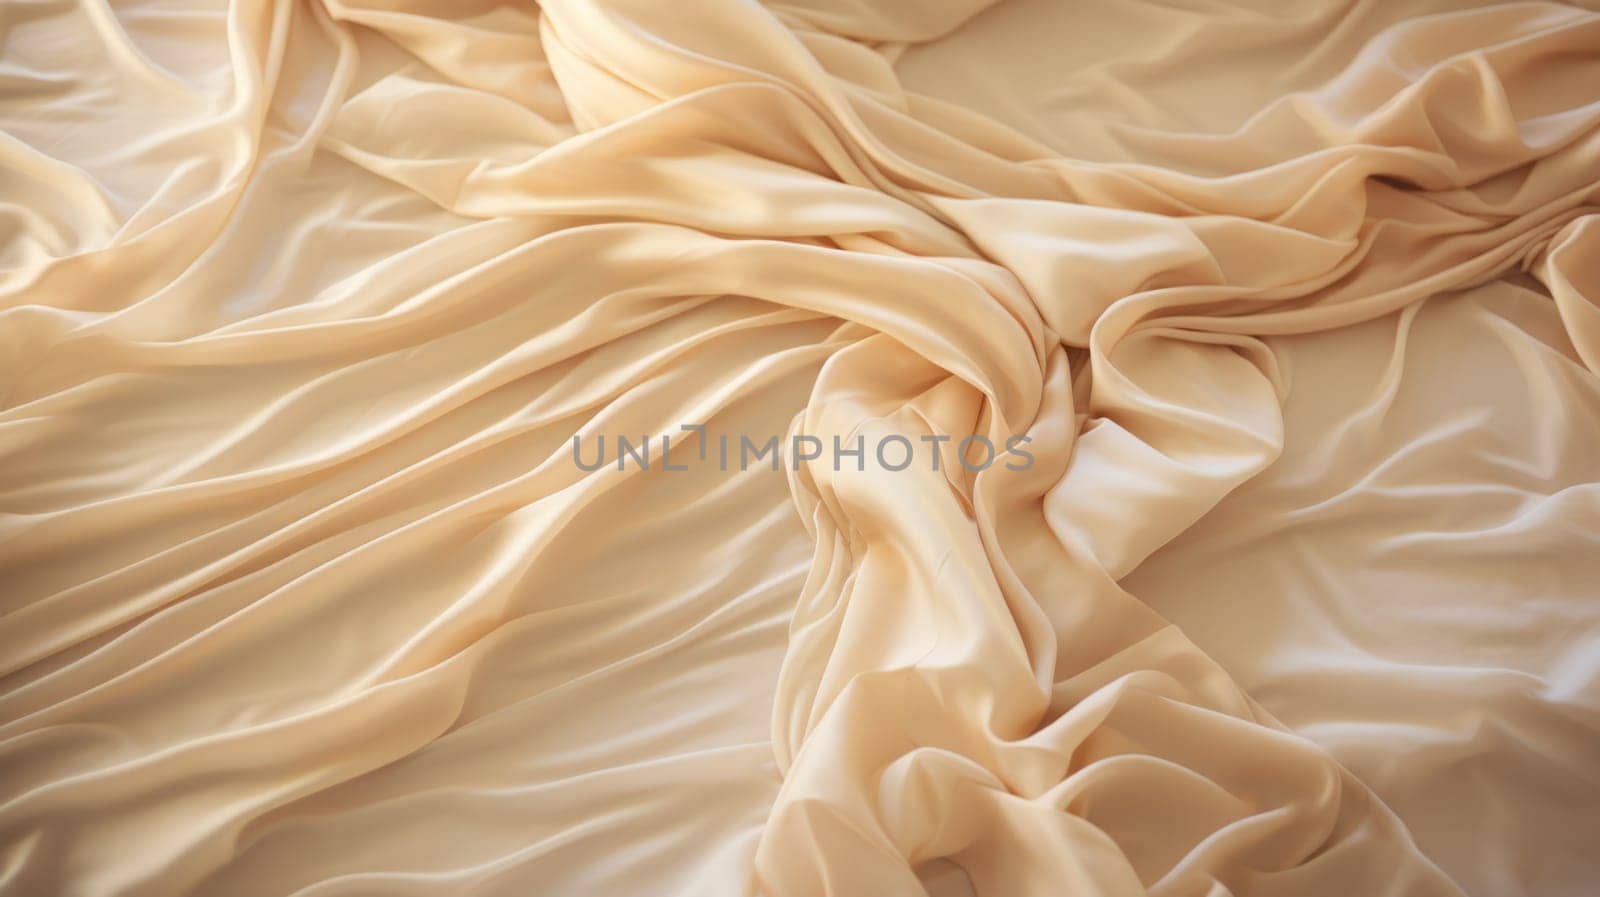 A close up of a piece of fabric that is draped